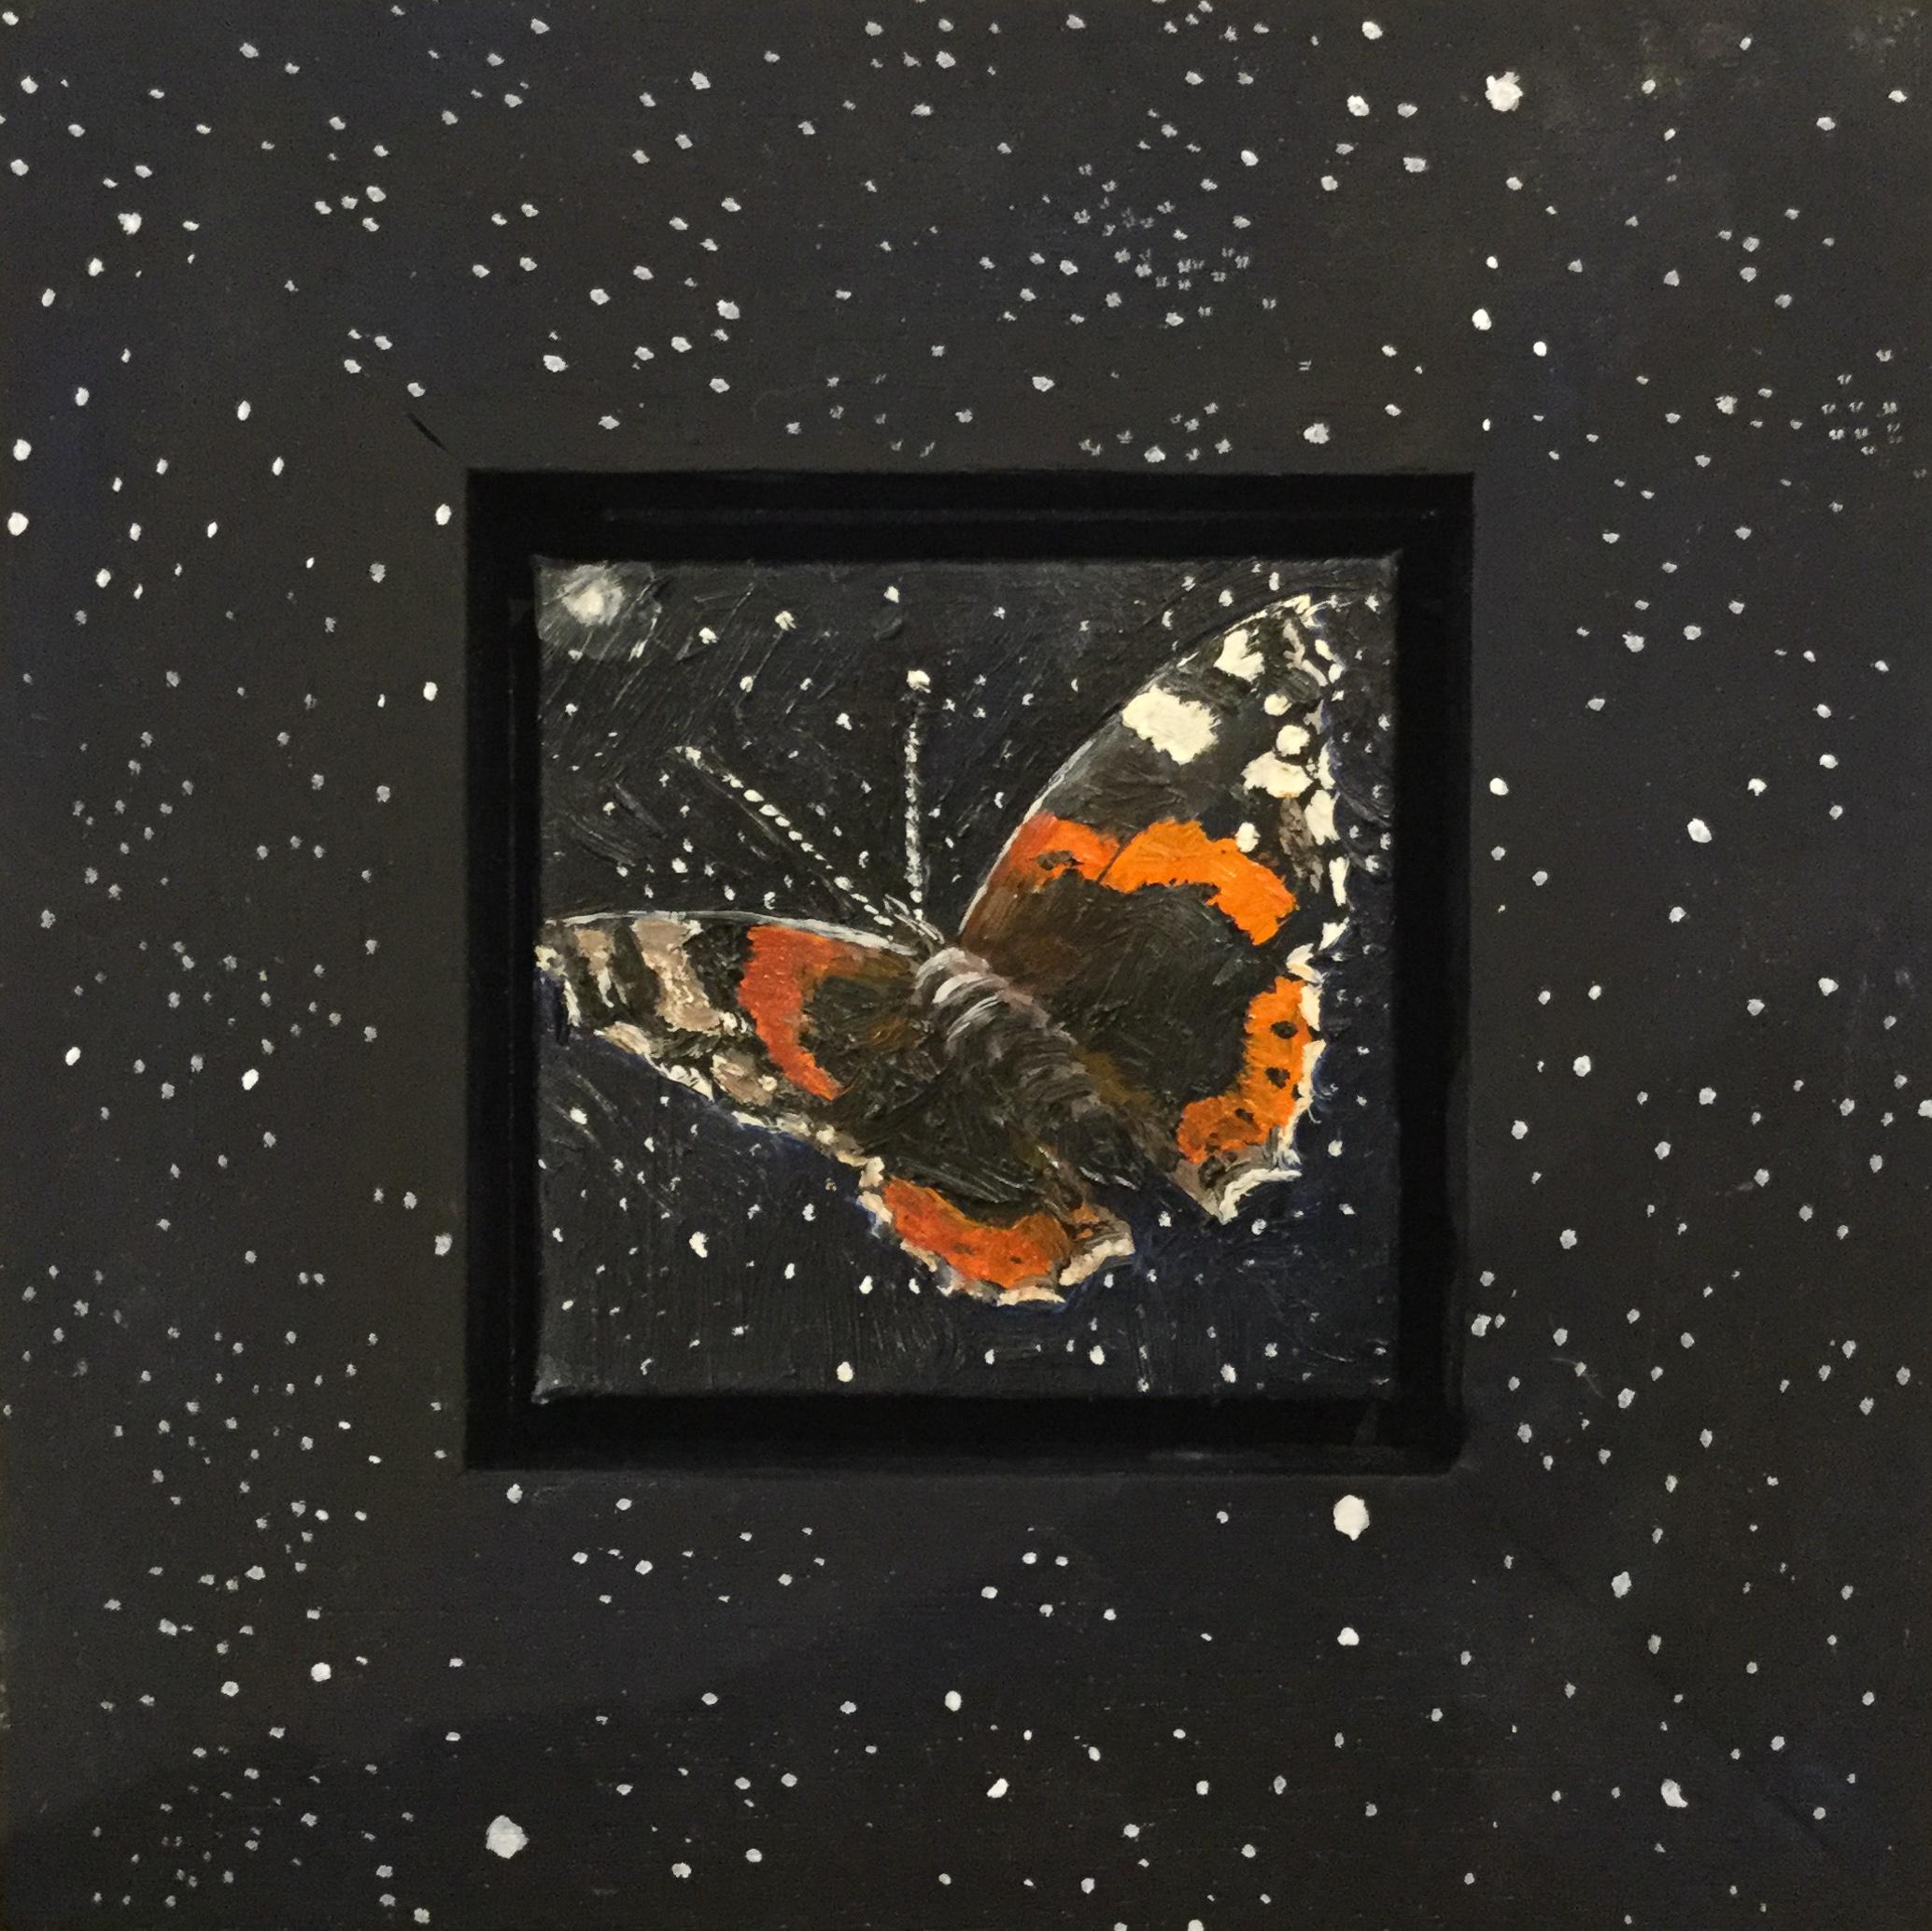 Julie Fleming-Williams Animal Painting - Red admiral by starlight